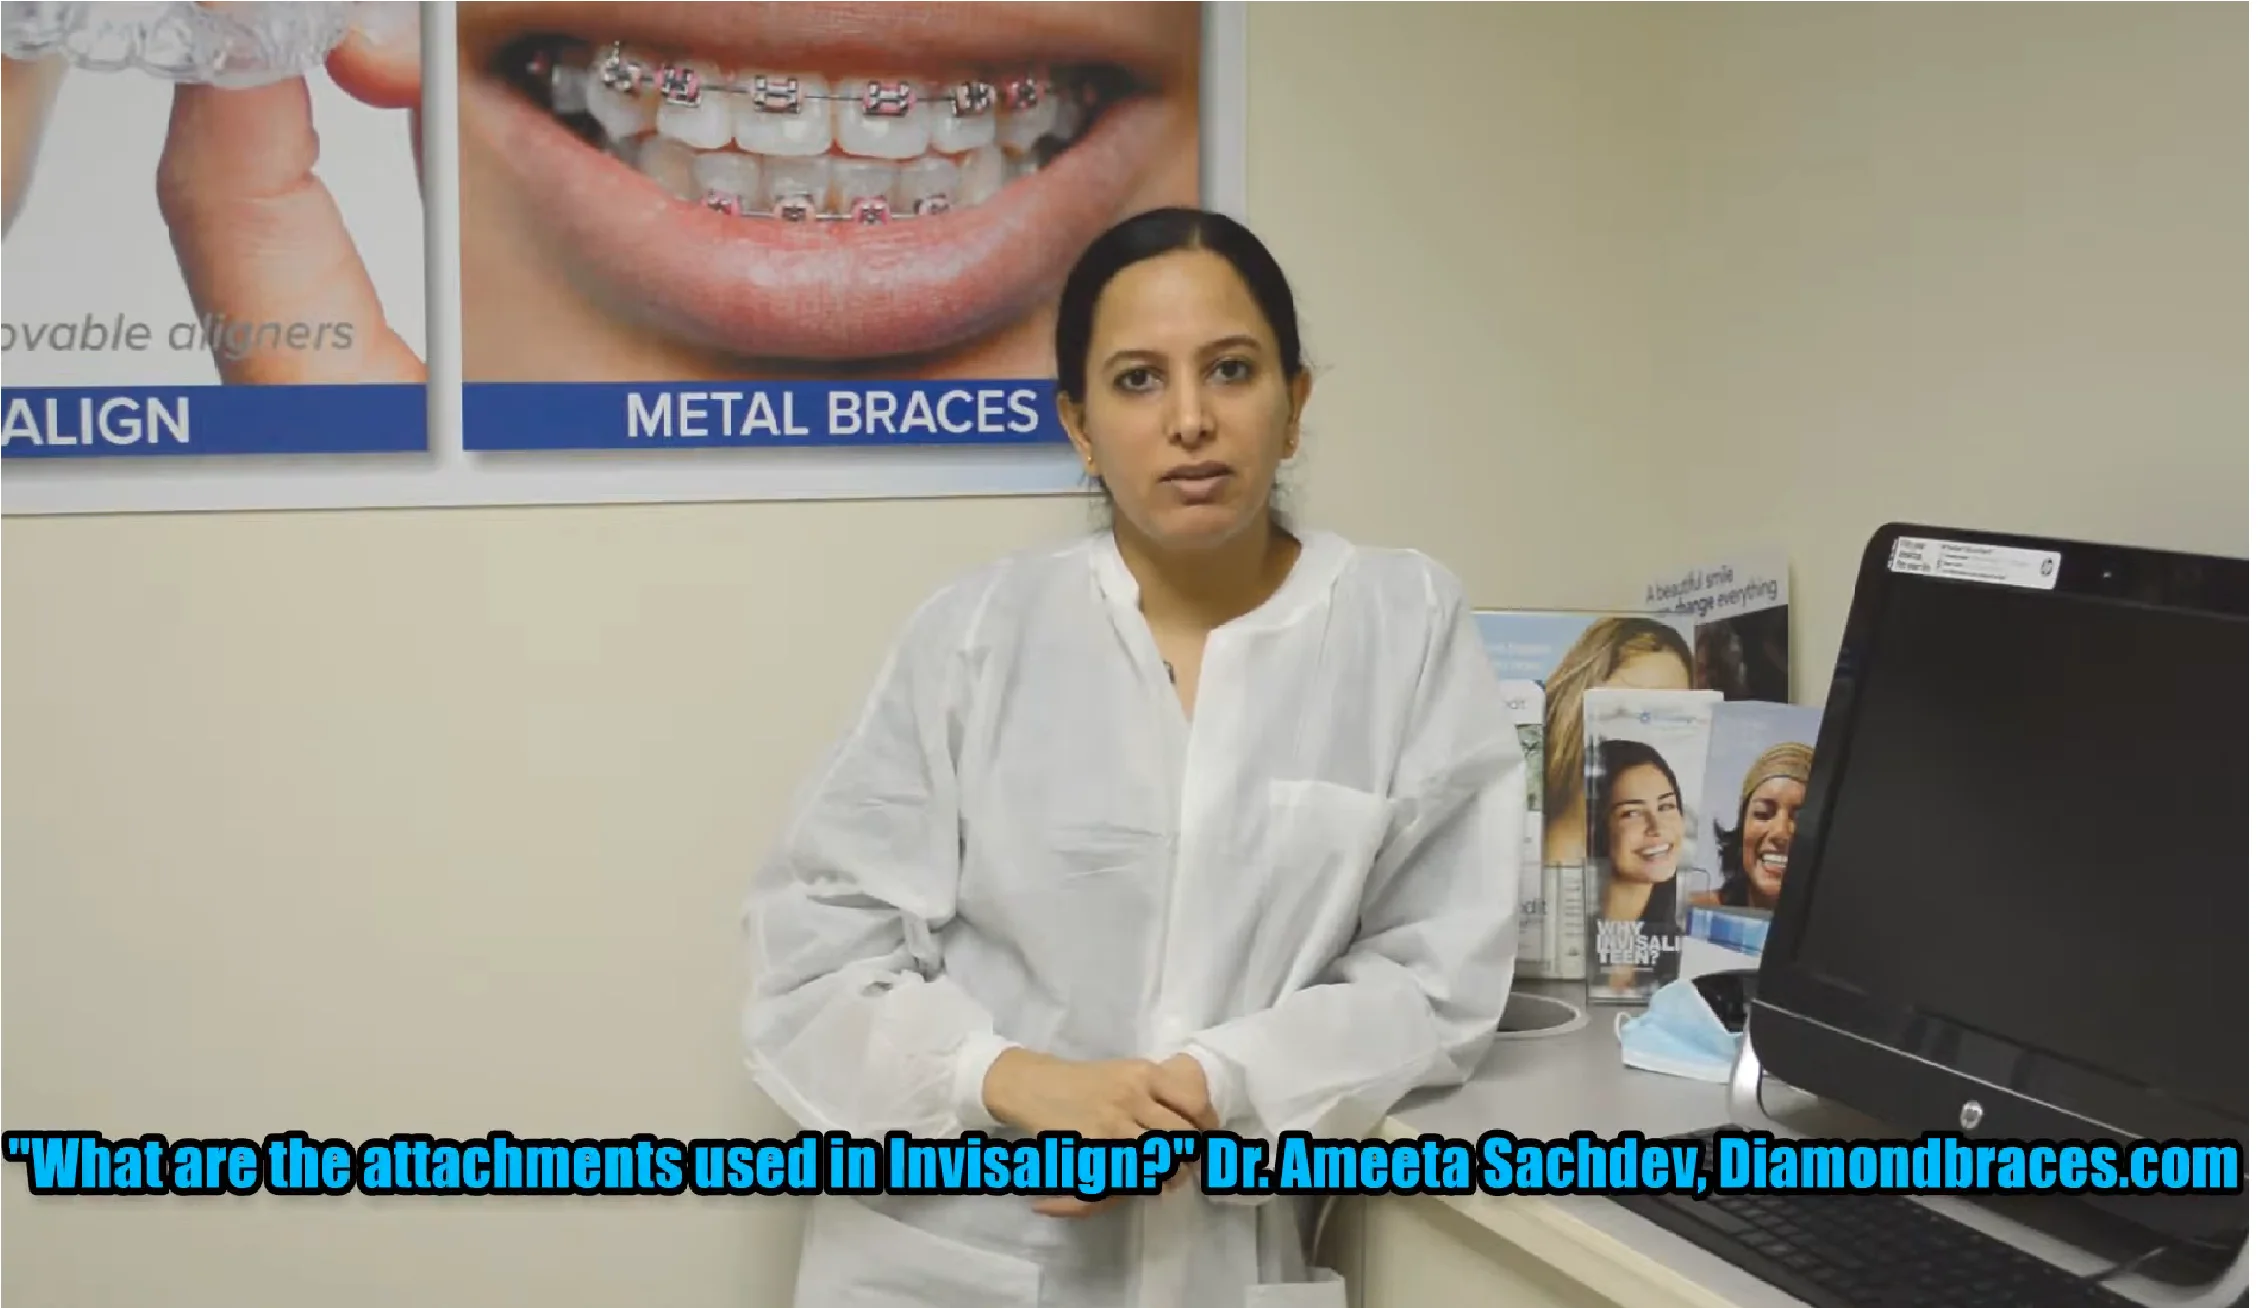 Invisalign attachments are far less noticeable than metal braces. They